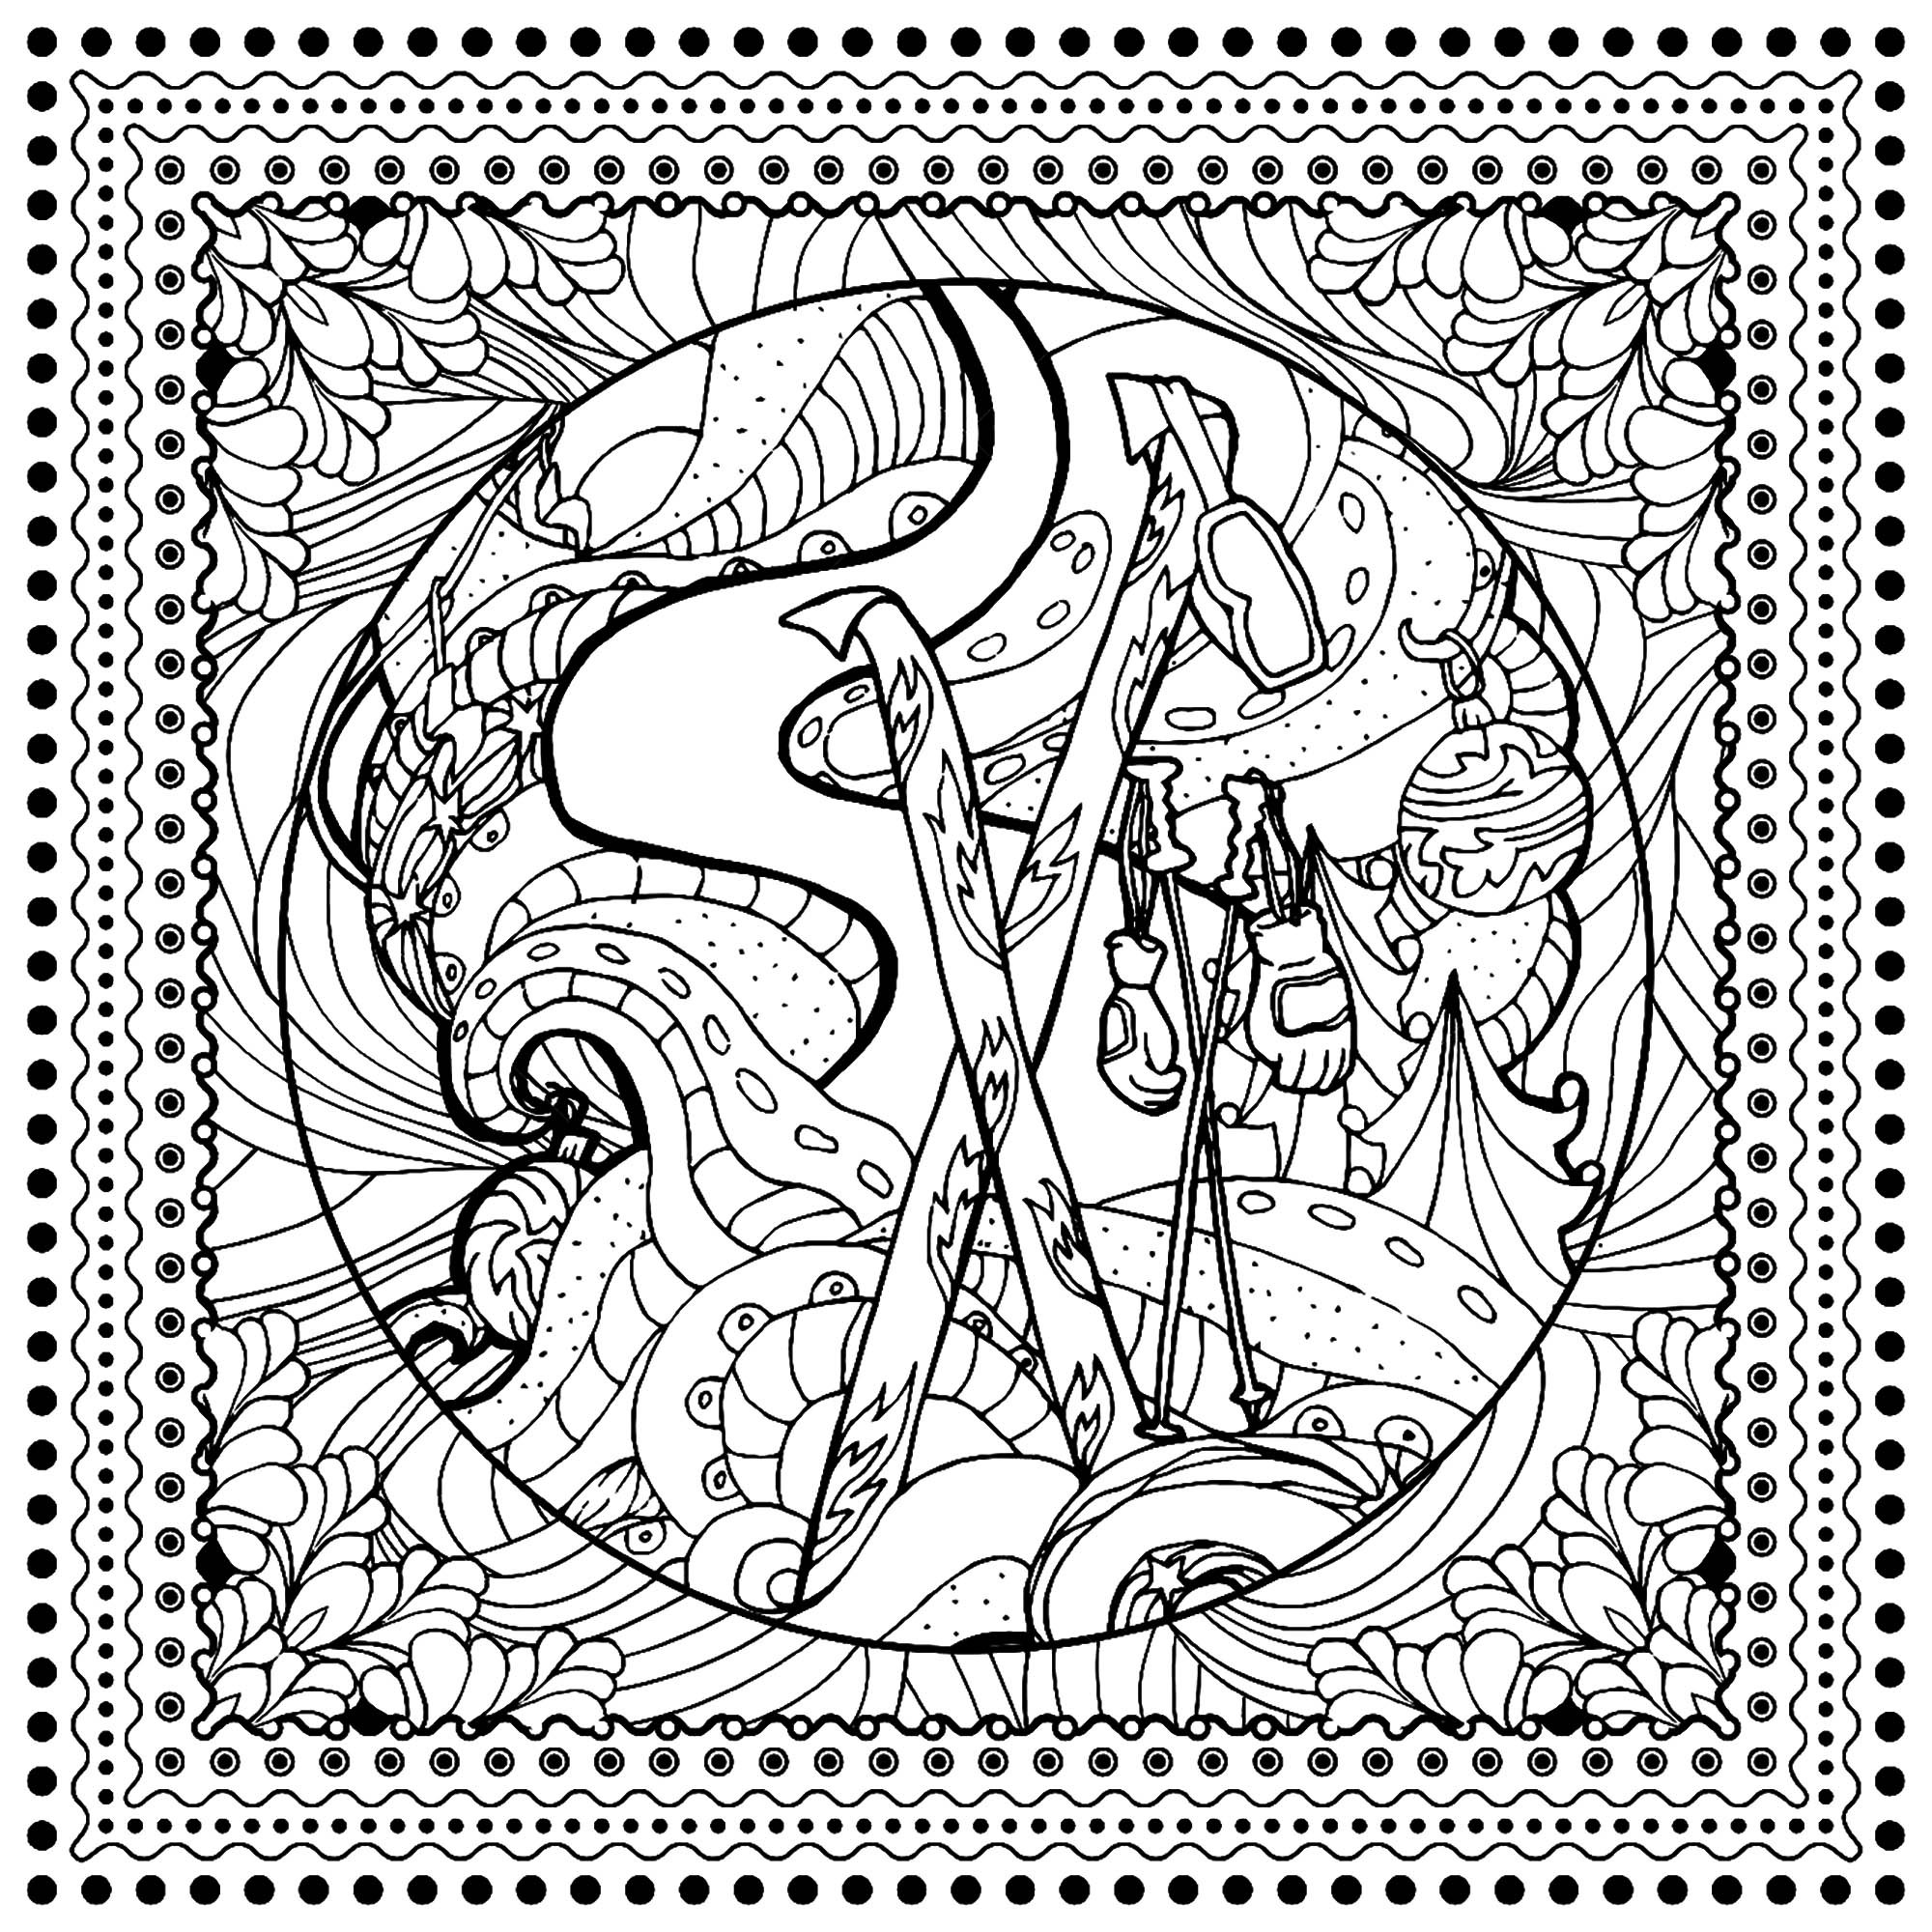 Sports Coloring Pages For Adults
 Winter sports ilonitta Christmas Adult Coloring Pages